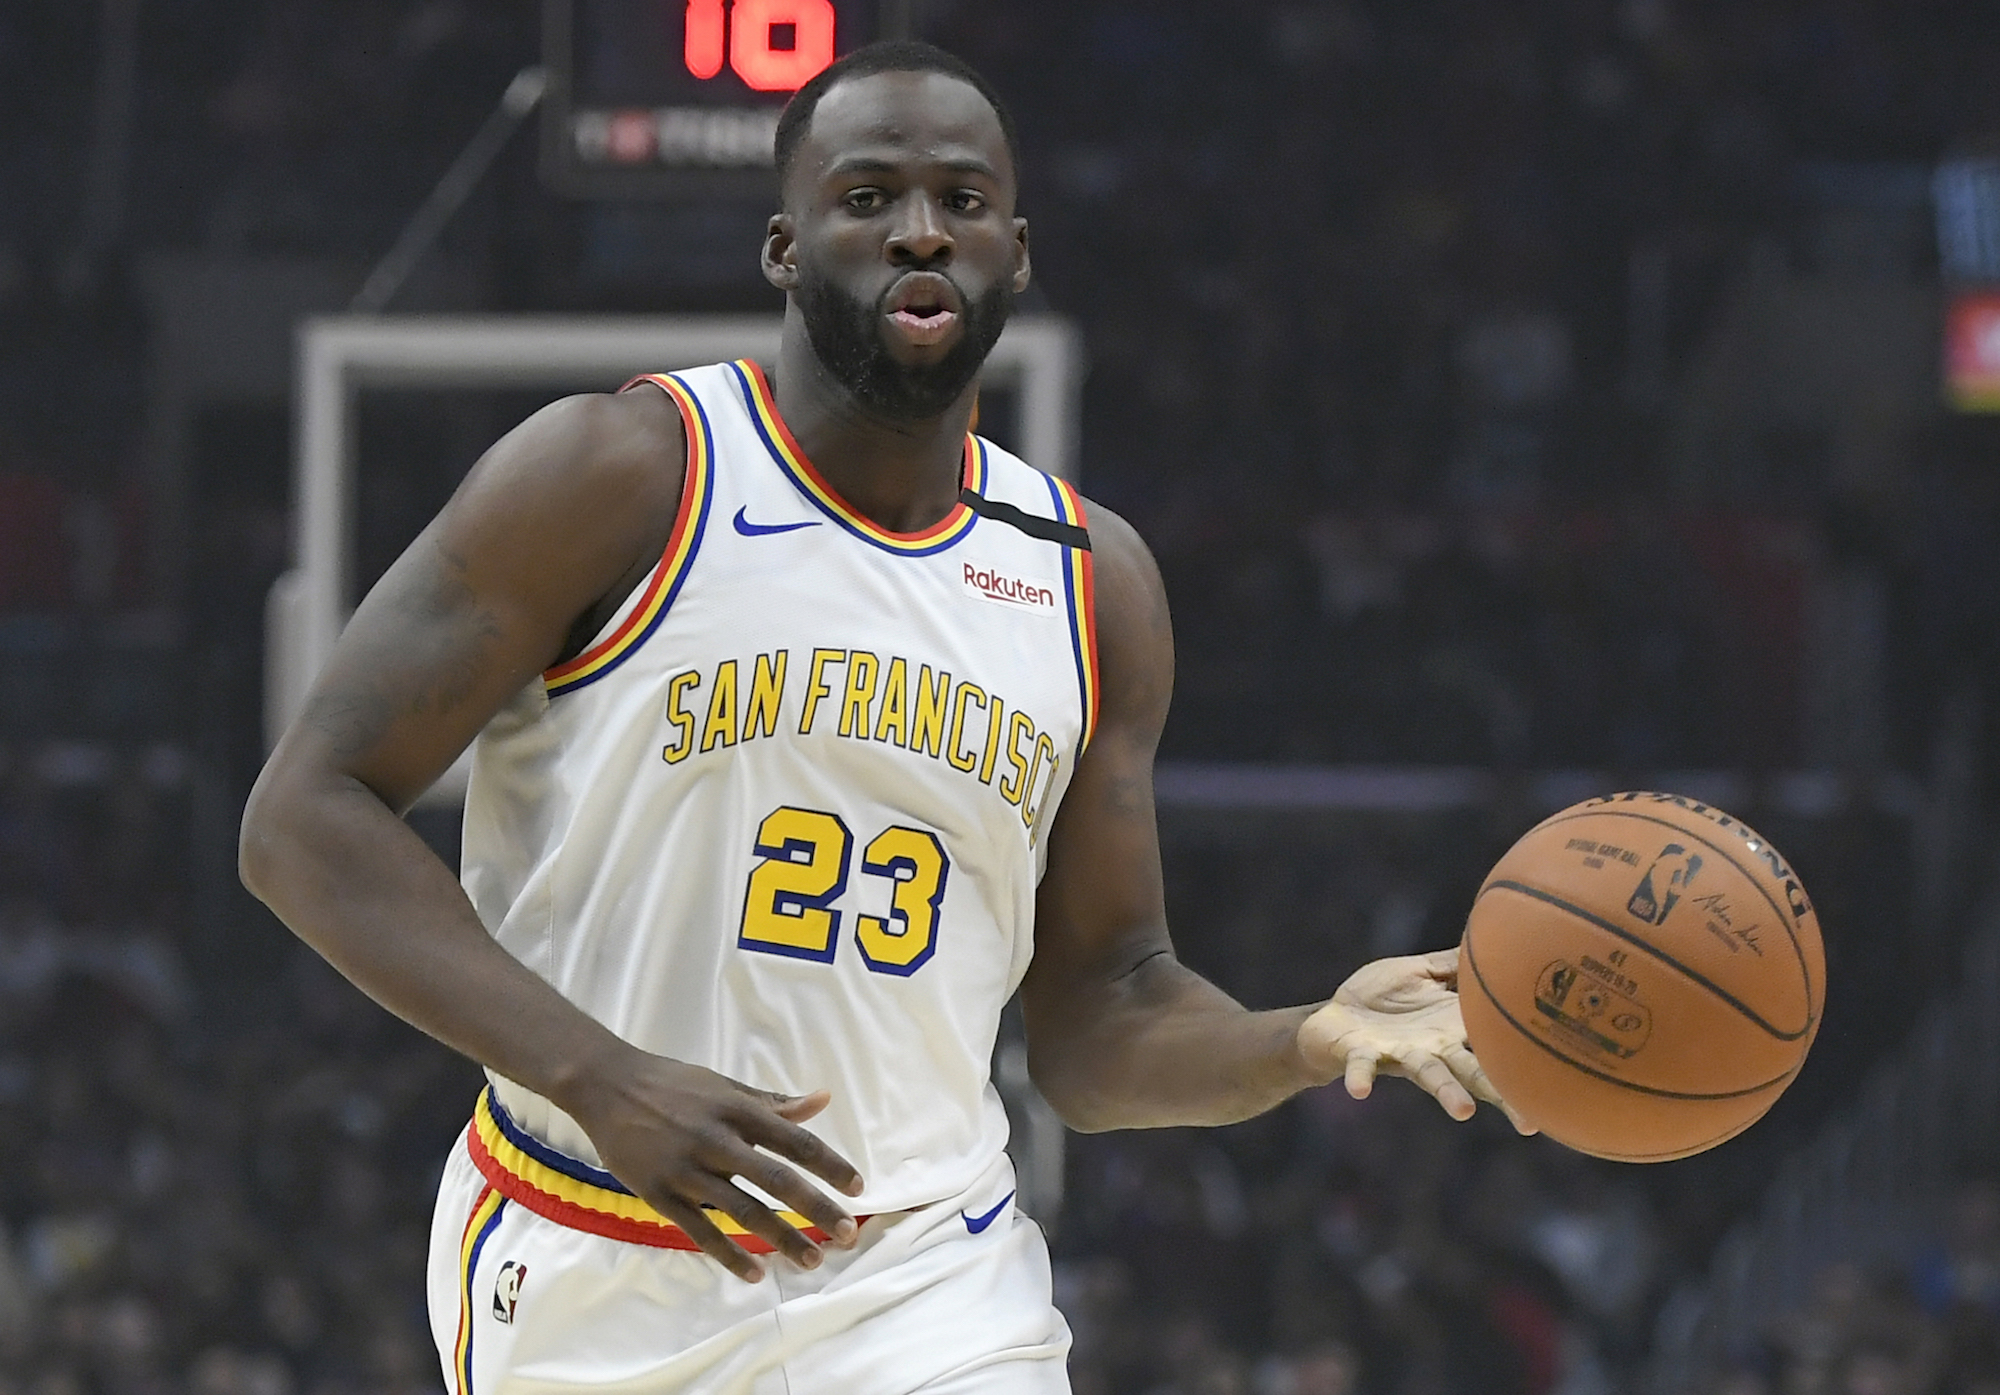 While Draymond Green isn't shy about sharing his opinions, he didn't vote in the 2016 election.